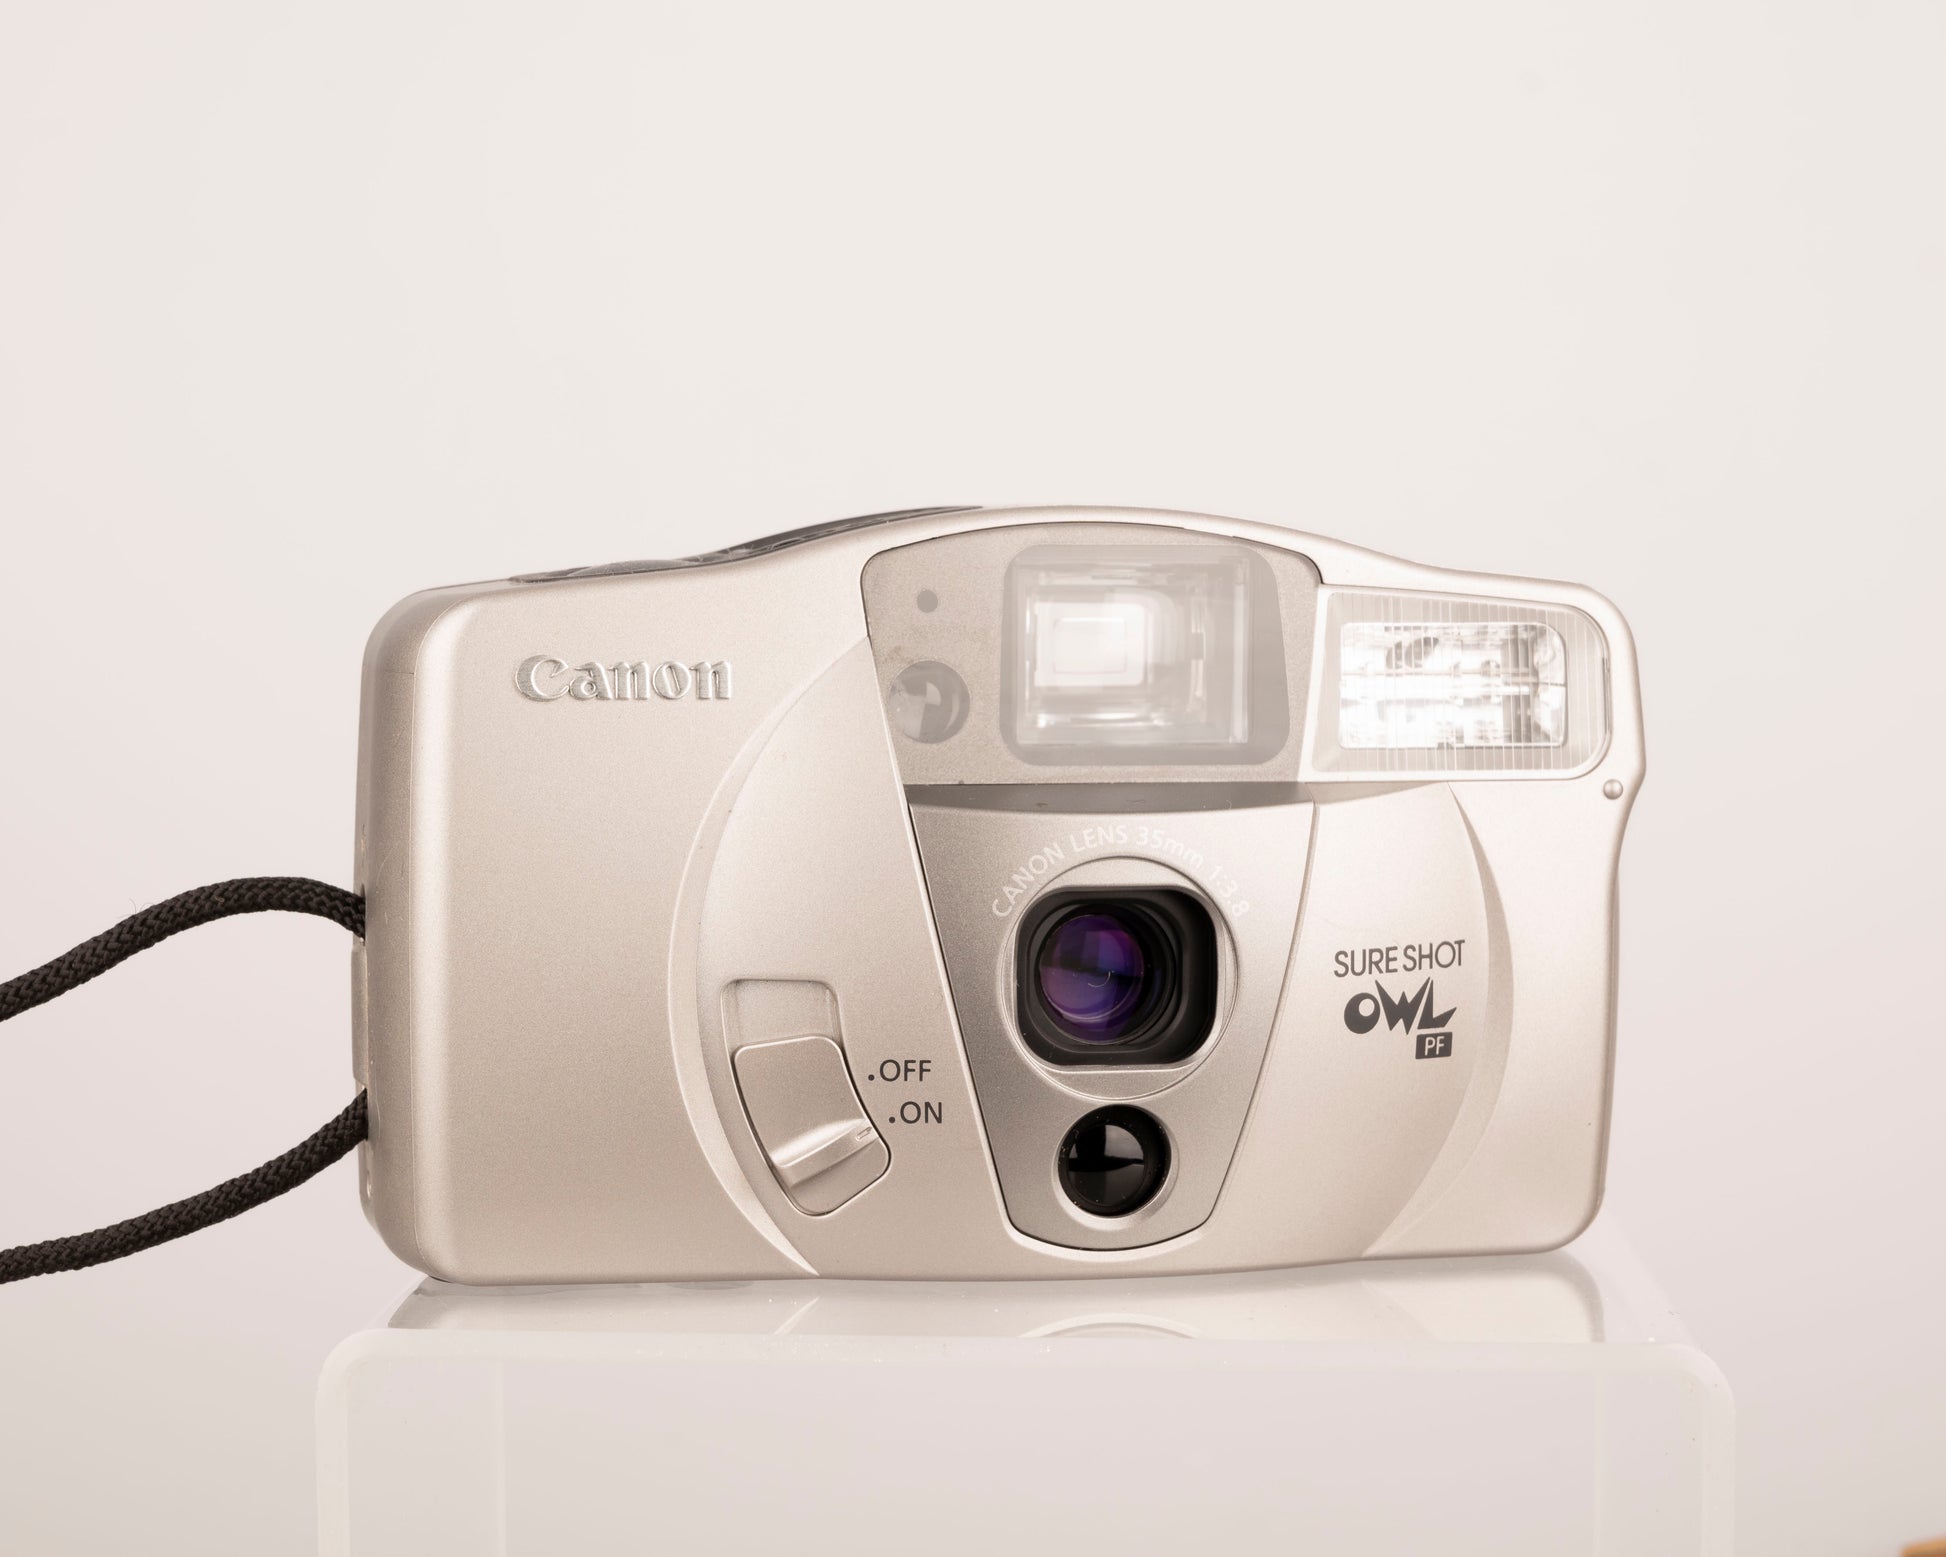 The Canon Sure Shot OWL PF is a well-designed 35mm point-and-shoot from circa-2000 featuring an unusually bright and large viewfinder